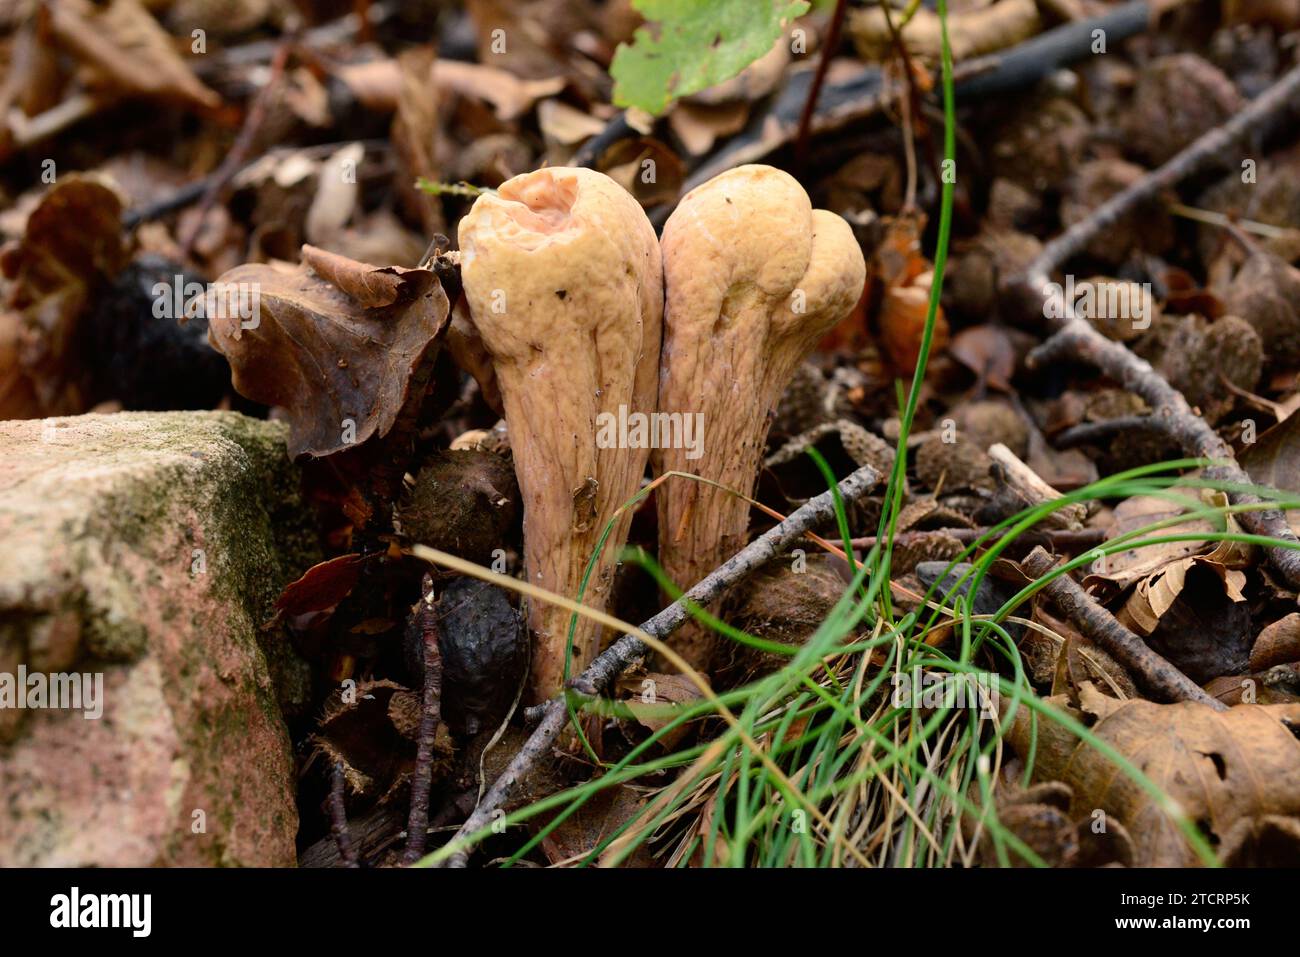 Largedubted clavaria (Clavariadelphus pistillaris) is a mushroom that grows in beech forest. This photo was taken in Montseny Biosphere Reserve, Barce Stock Photo